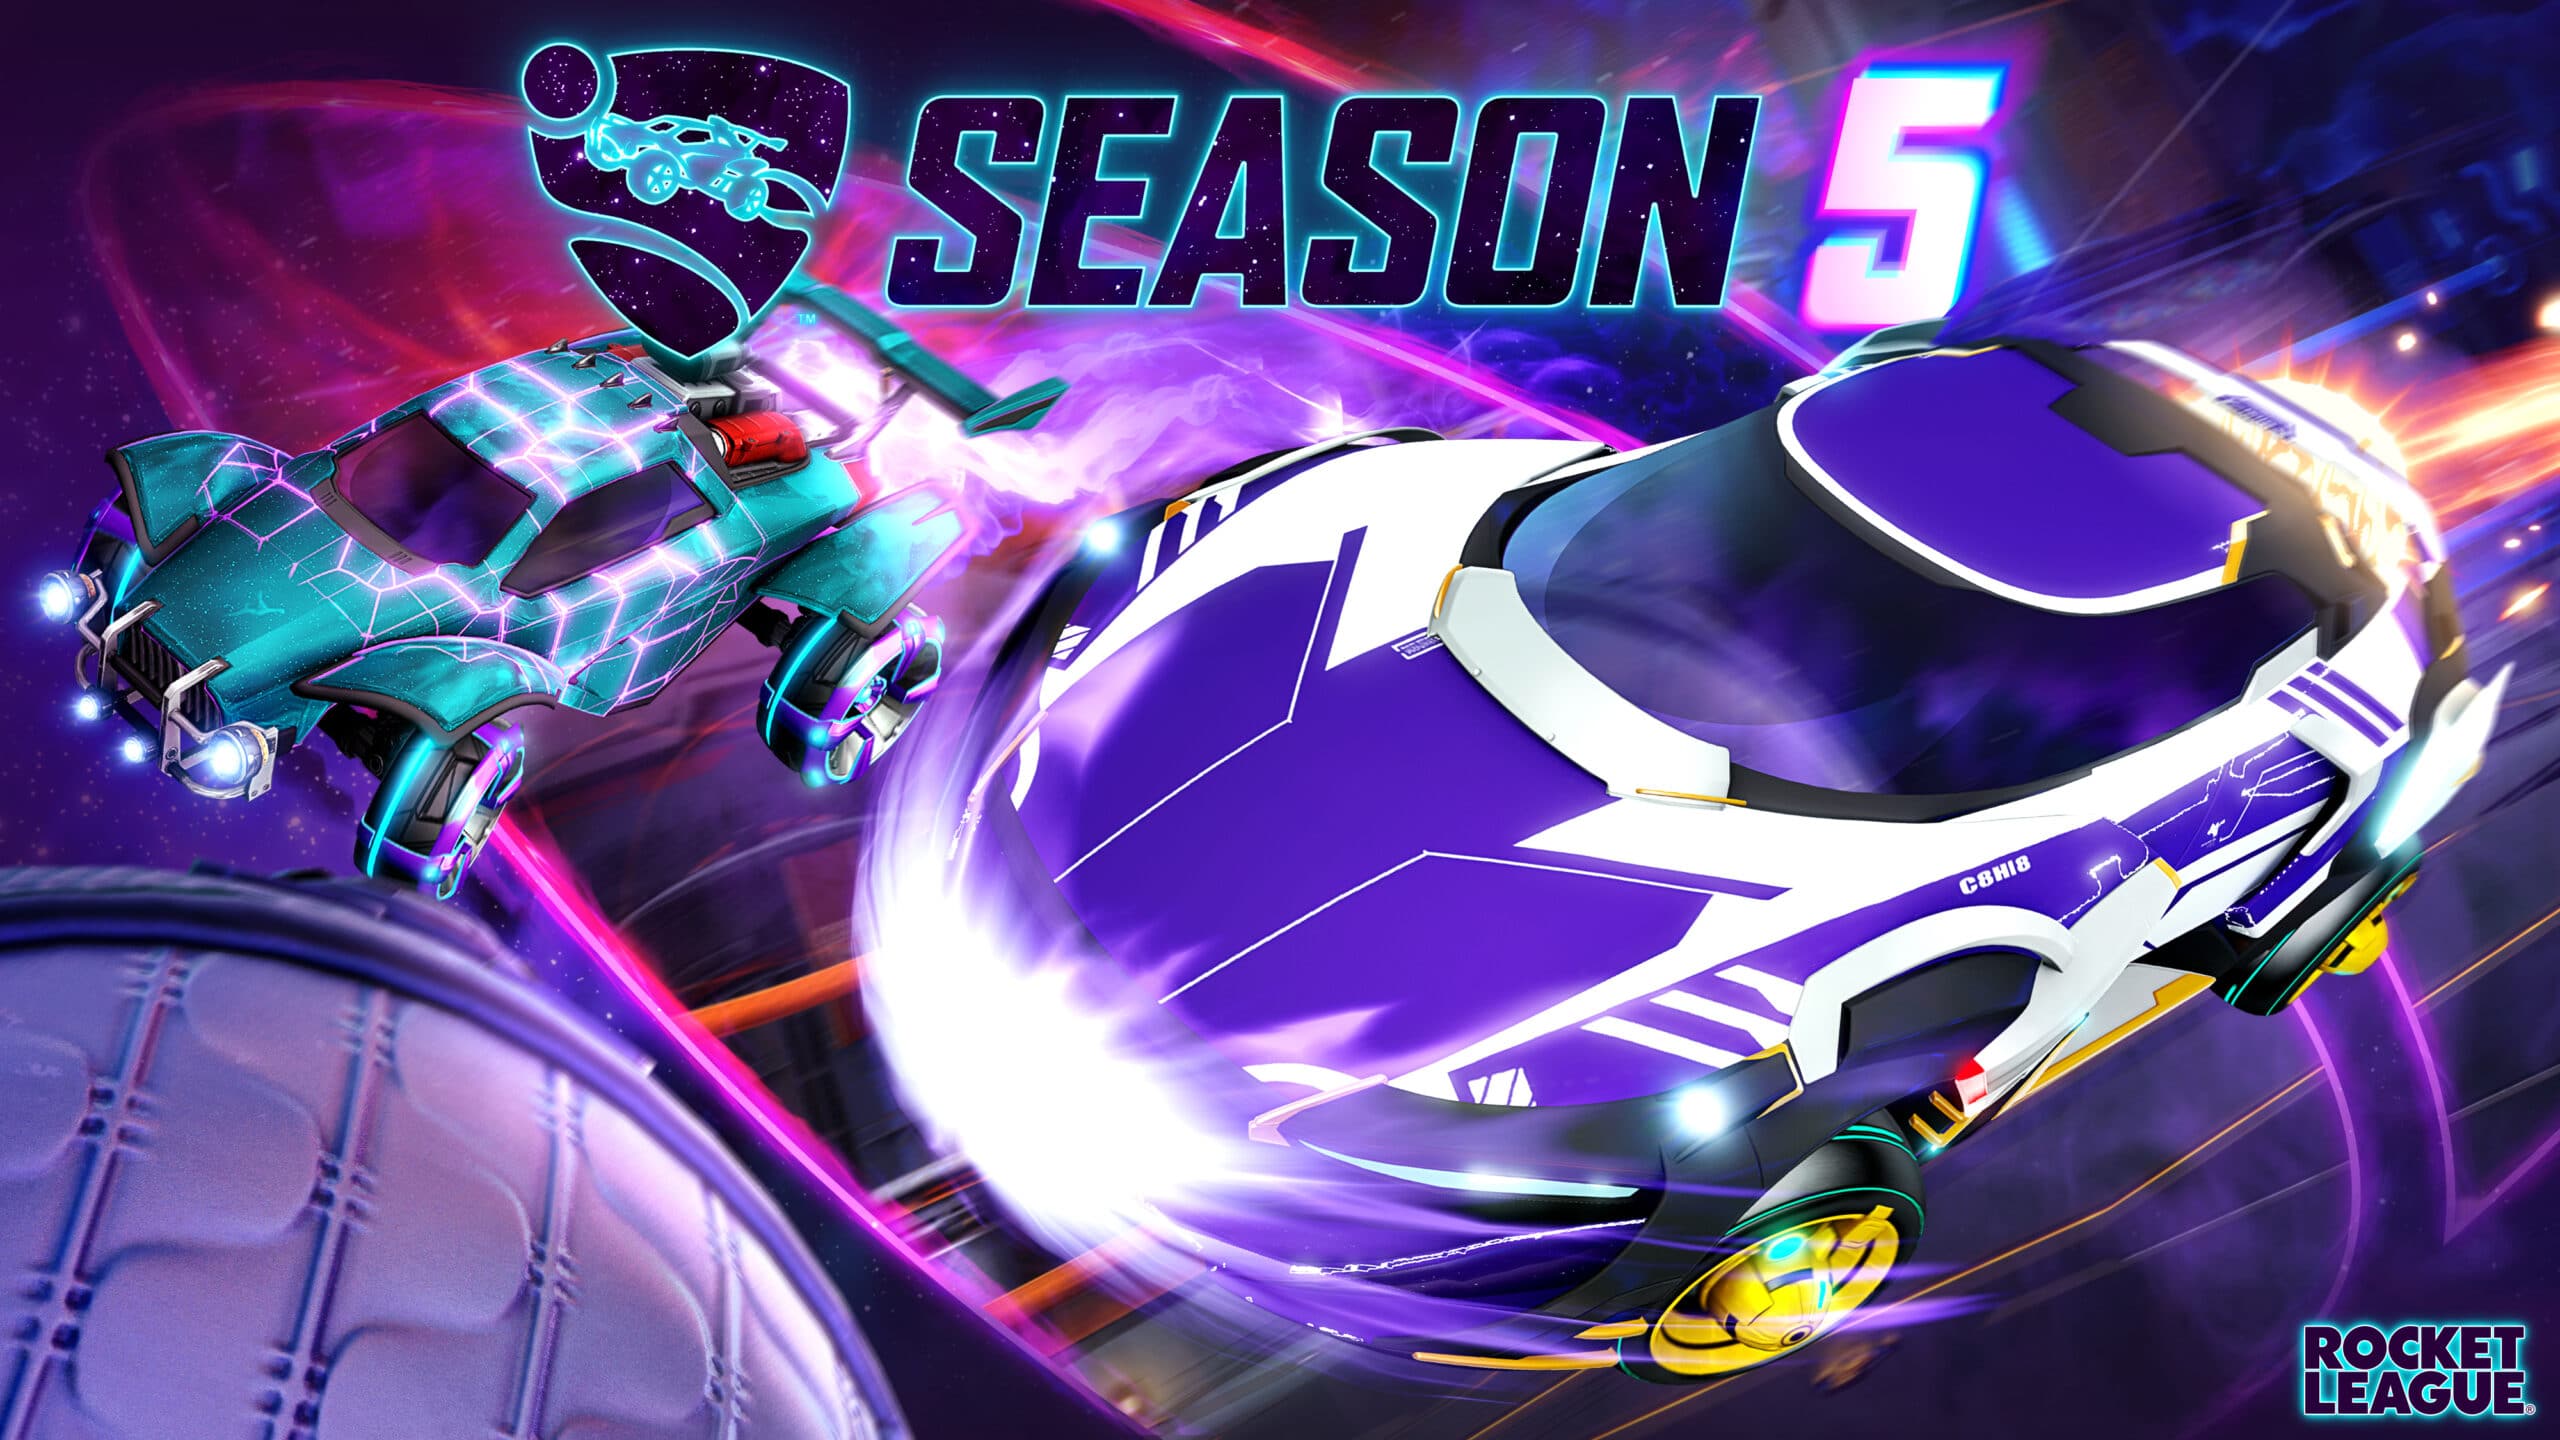 Rocket League Season 5 kicks off in a few days: here's what you need to know thumbnail